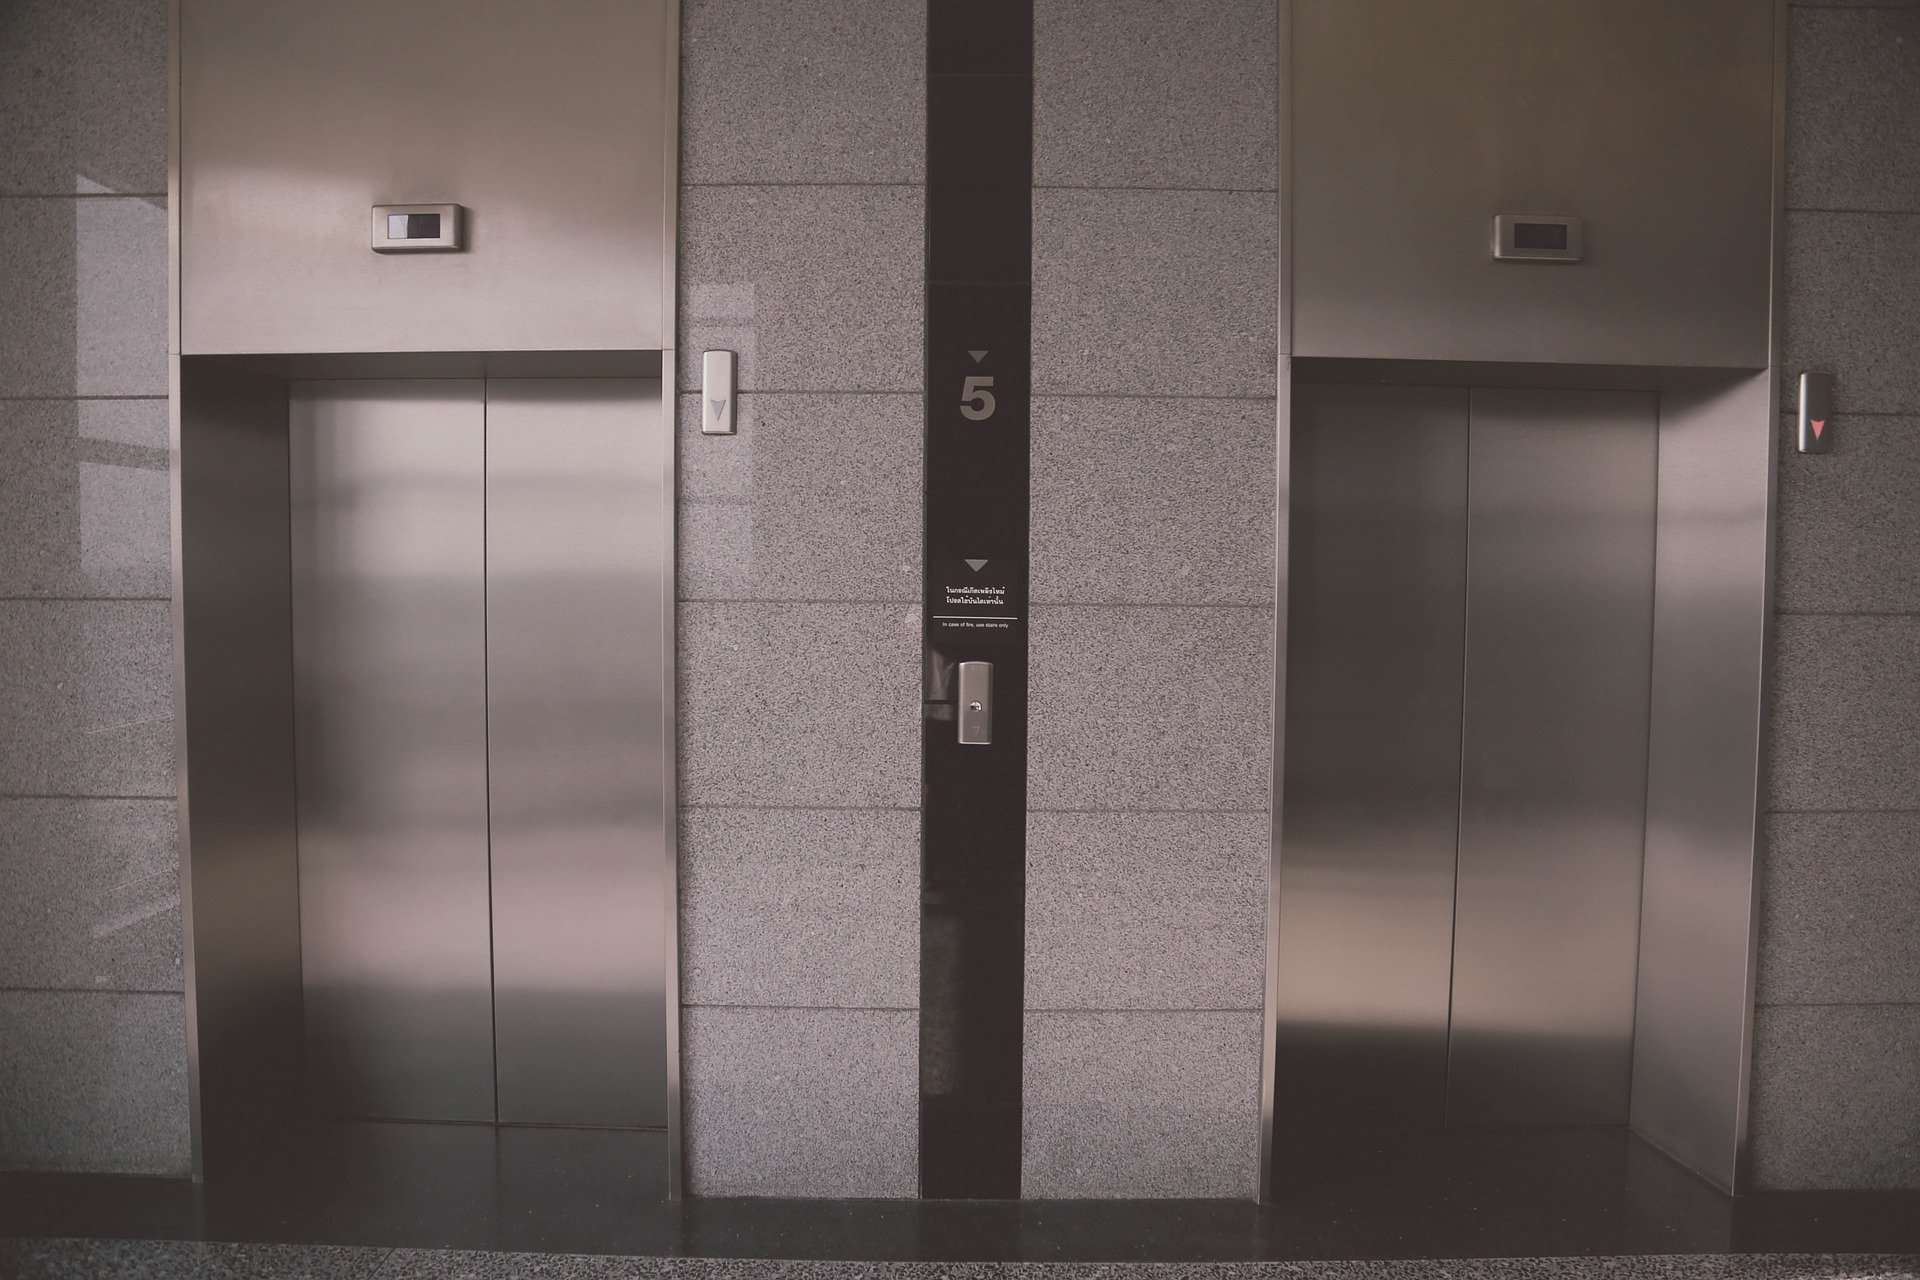 4 Reasons Why You Need Elevator Access Control